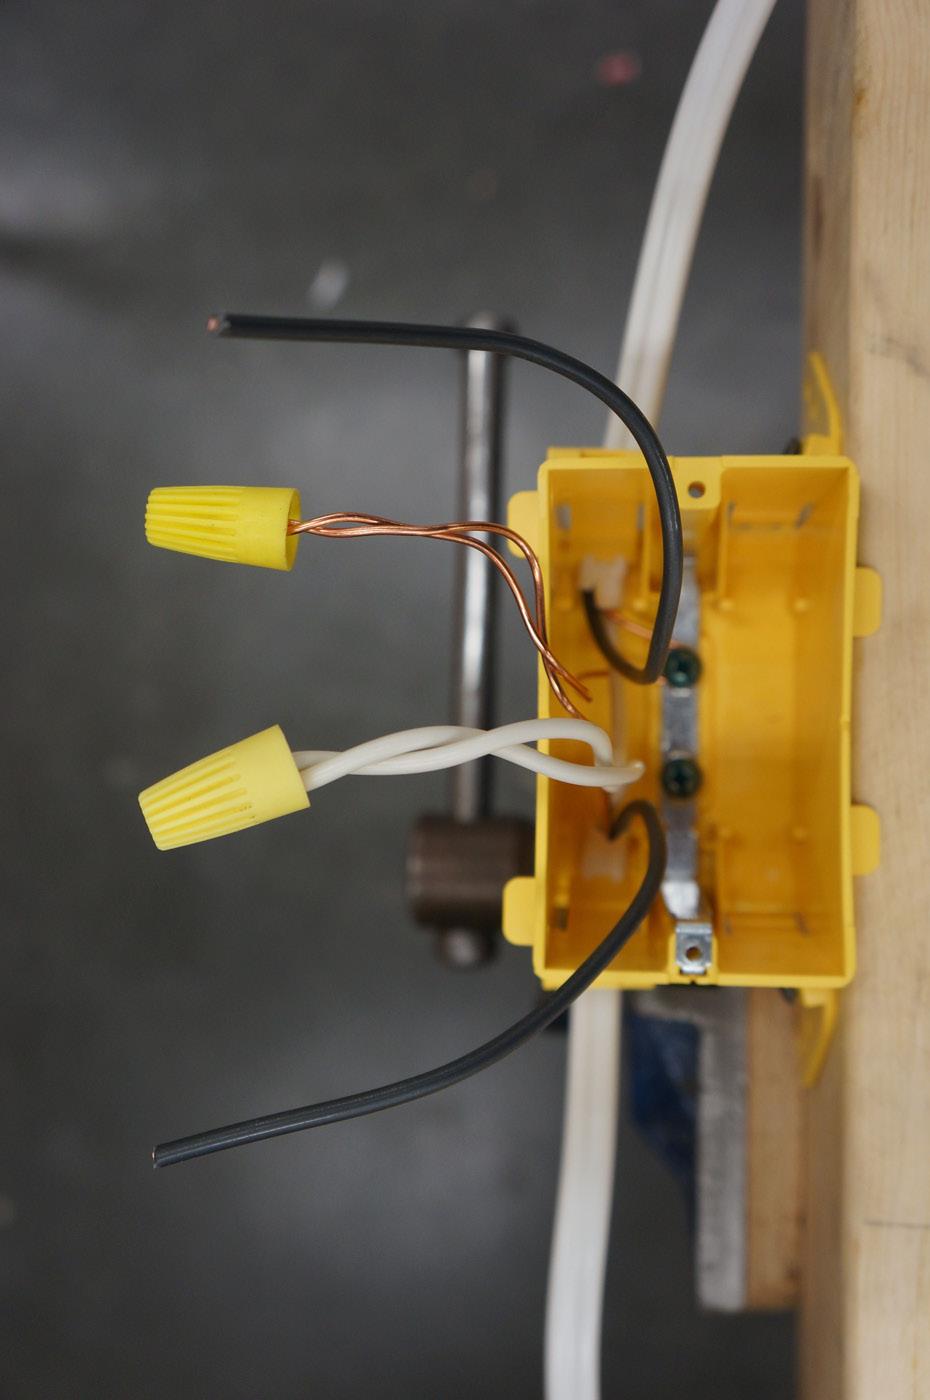 Electrician Switch Box 1. Cut, strip, and twist the two white conductors and join with a wire connector in the switch box (Figure 18).